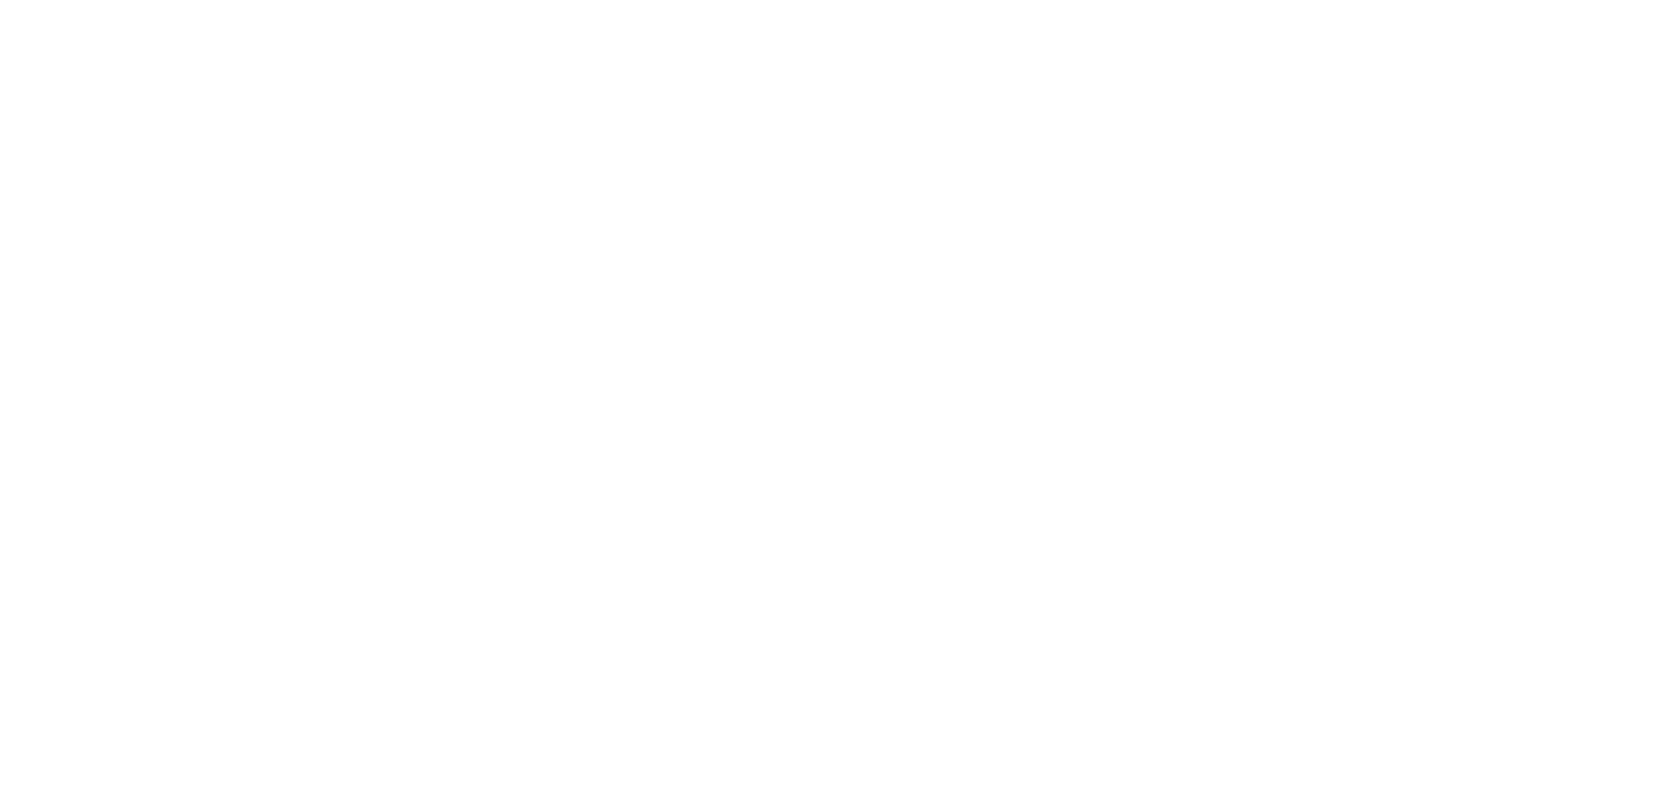 This is the logo for the STMNT brand.